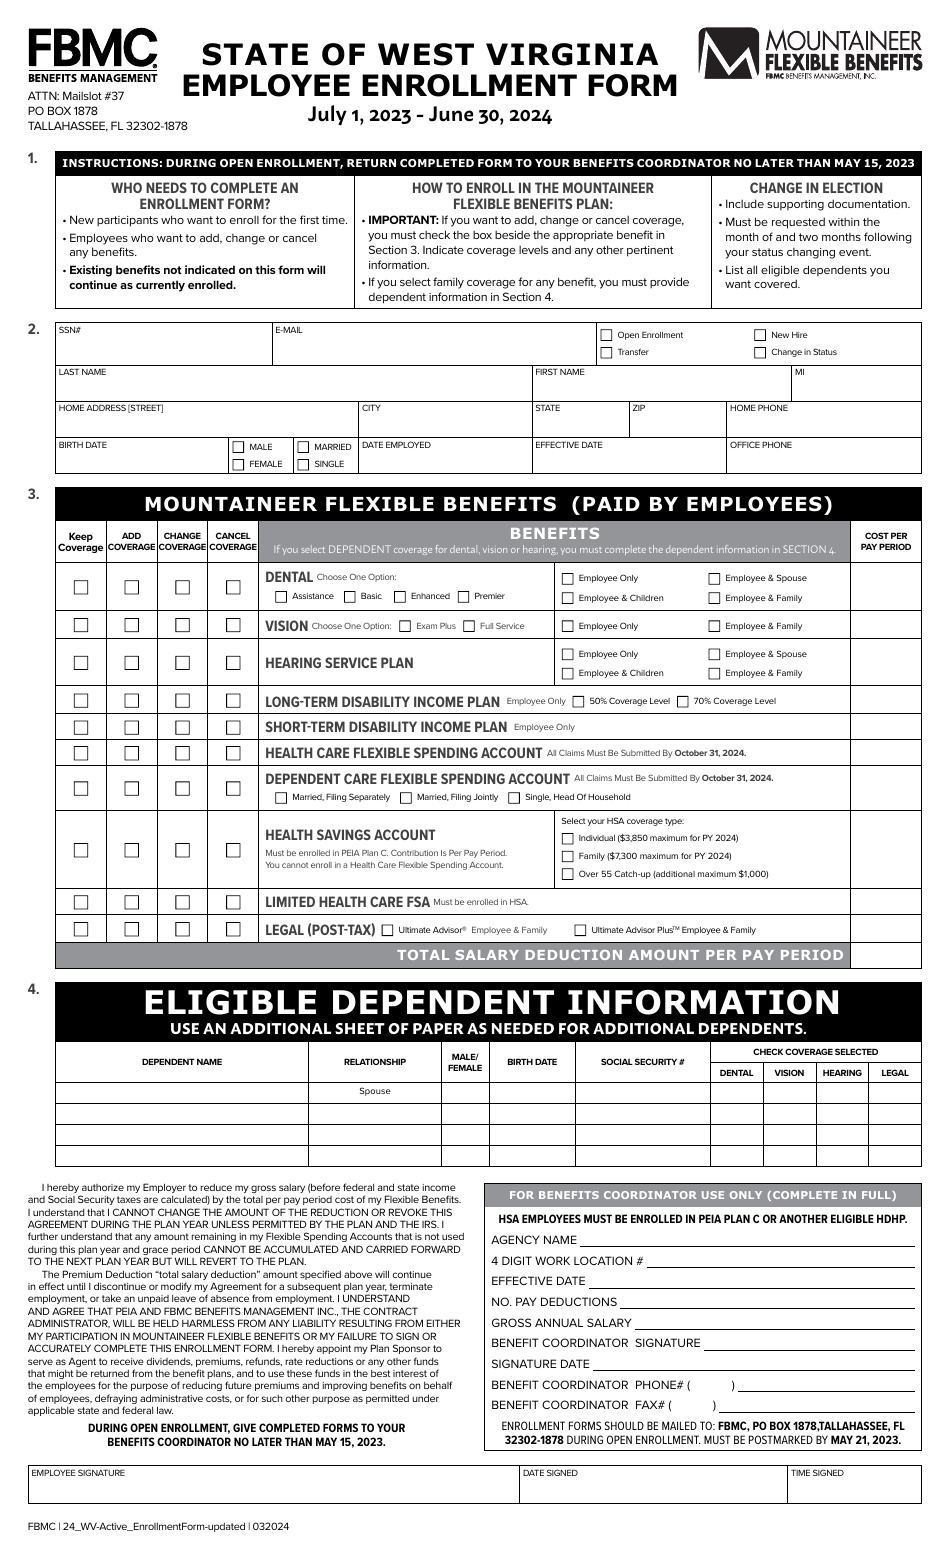 Mountaineer Flexible Benefits Employee Enrollment Form - West Virginia, Page 1